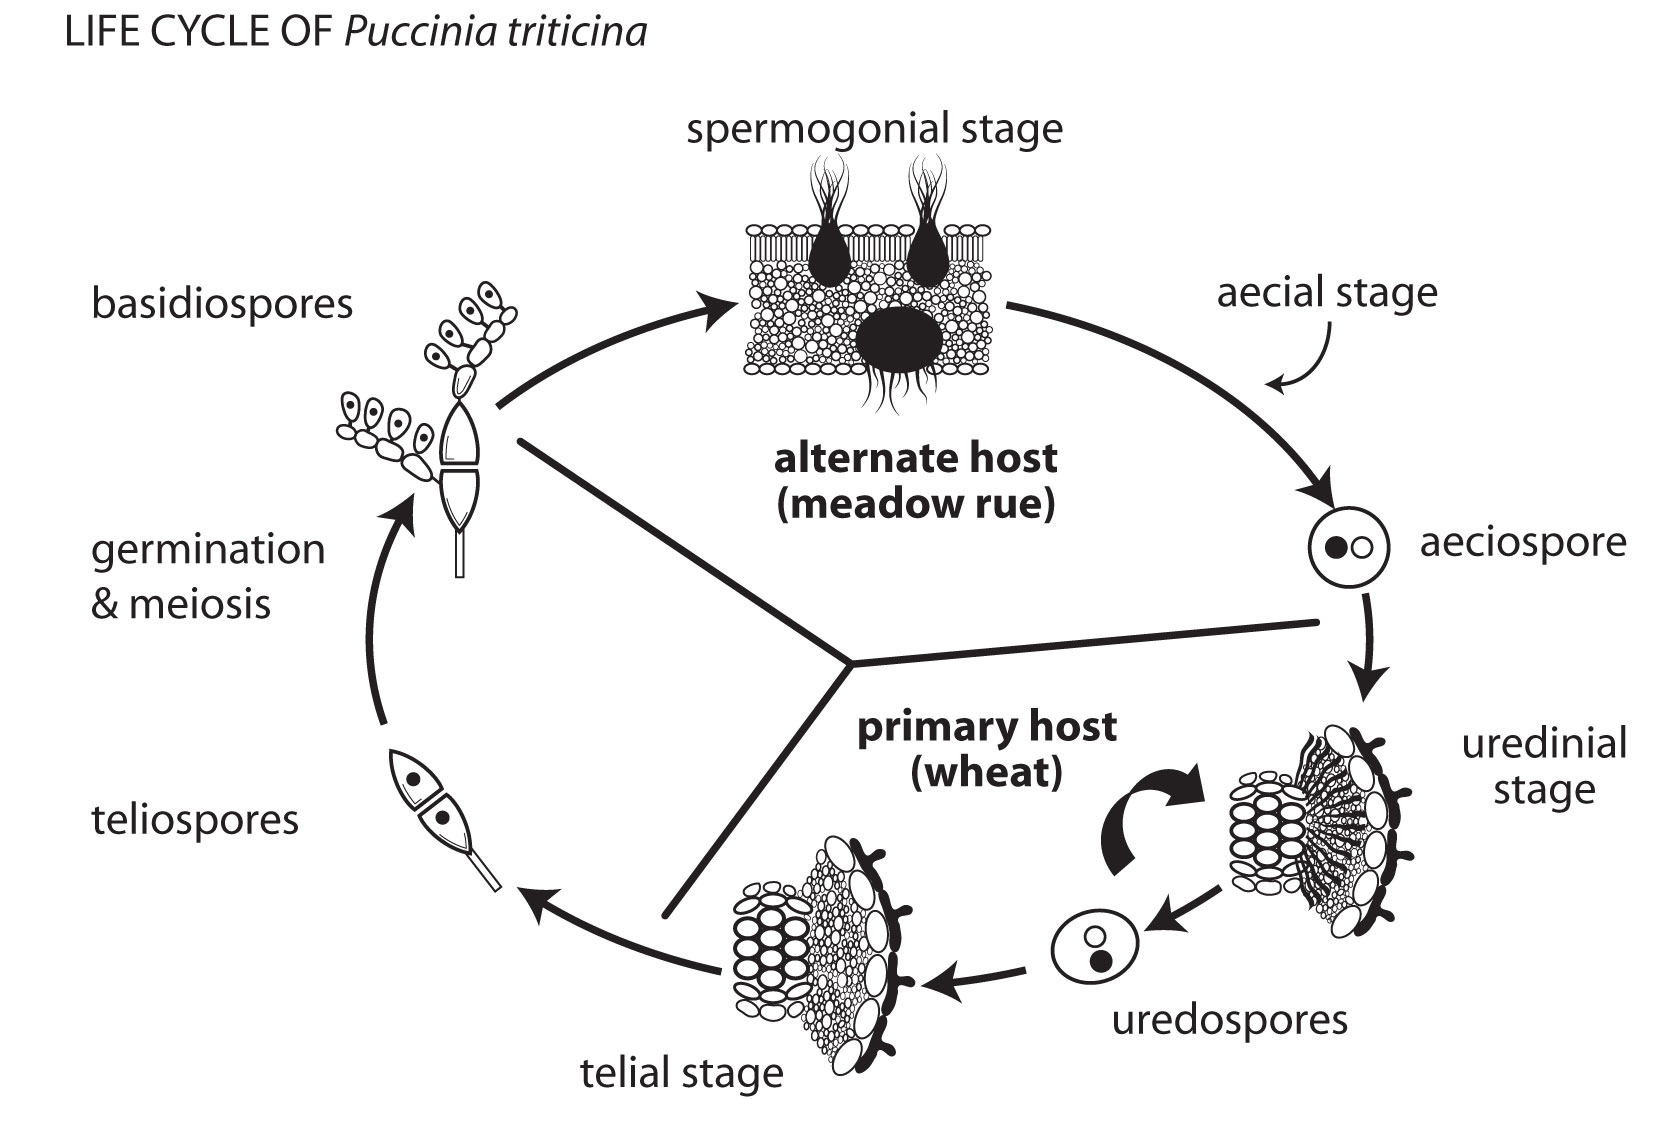 Illustration of leaf rust life cycle showing both primary and alternate hosts.